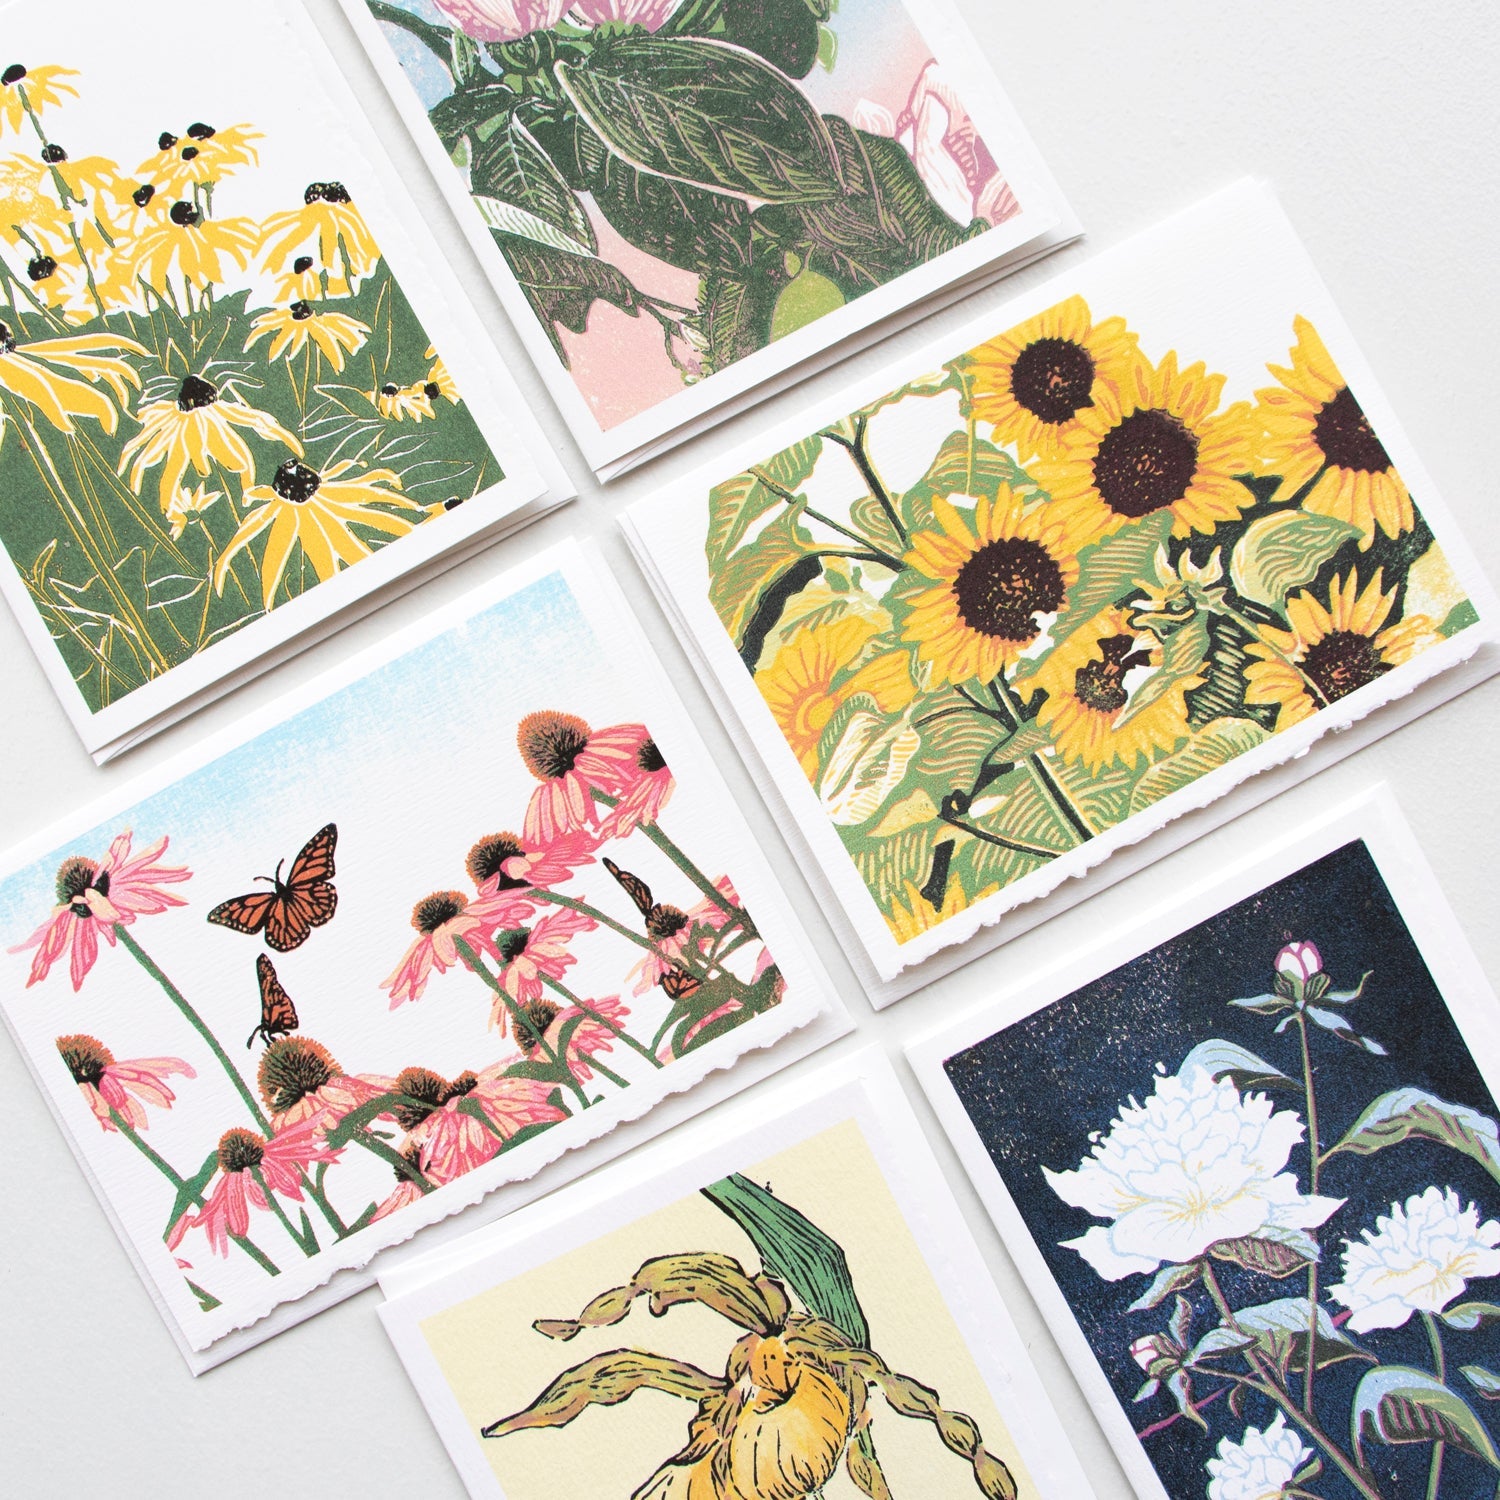 A casually elegant set of floral cards featuring flower art by printmaker Natalia Wohletz of Peninsula Prints.